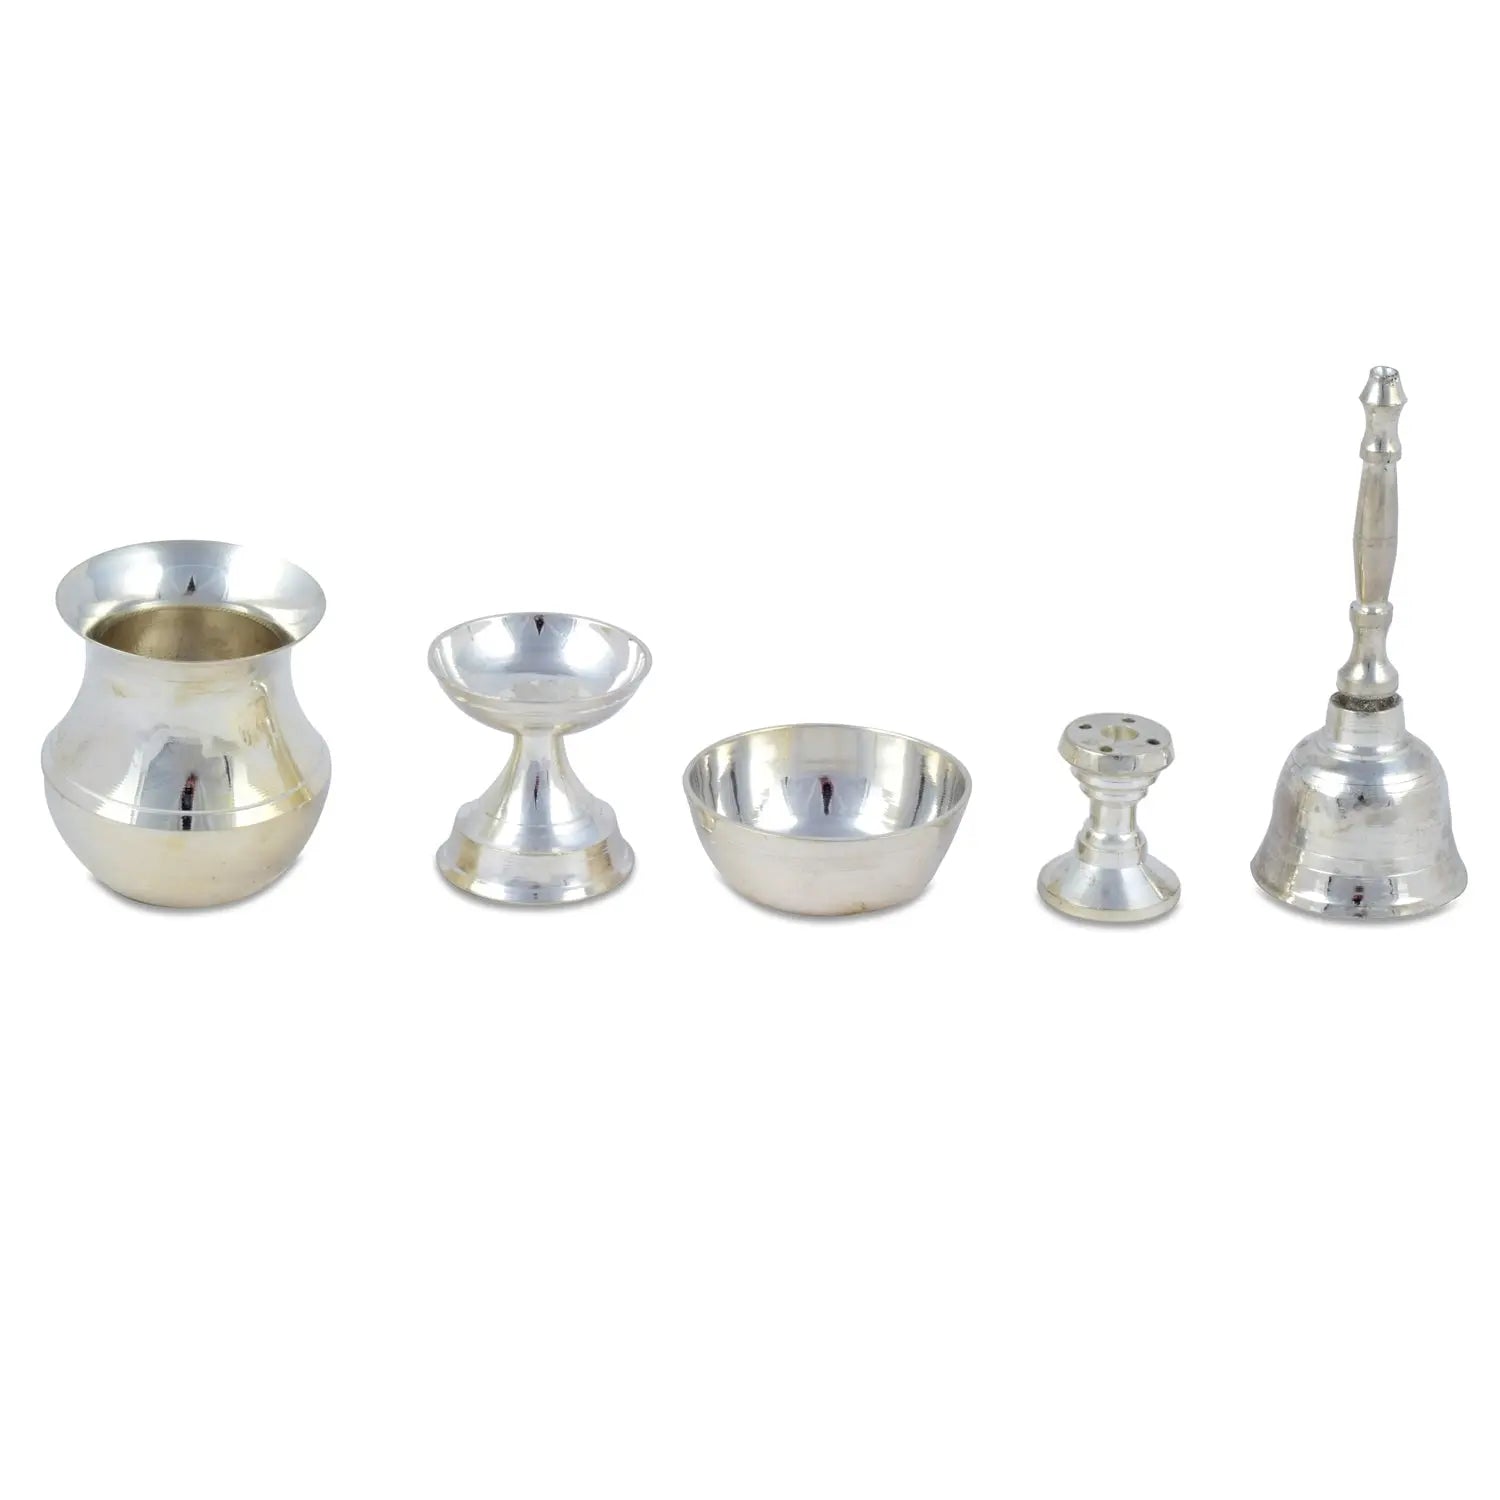 Asthmangal Brass Silver Thali Set for Pooja/Aarti and gifting for worshipping - CROCKERY WALA AND COMPANY 